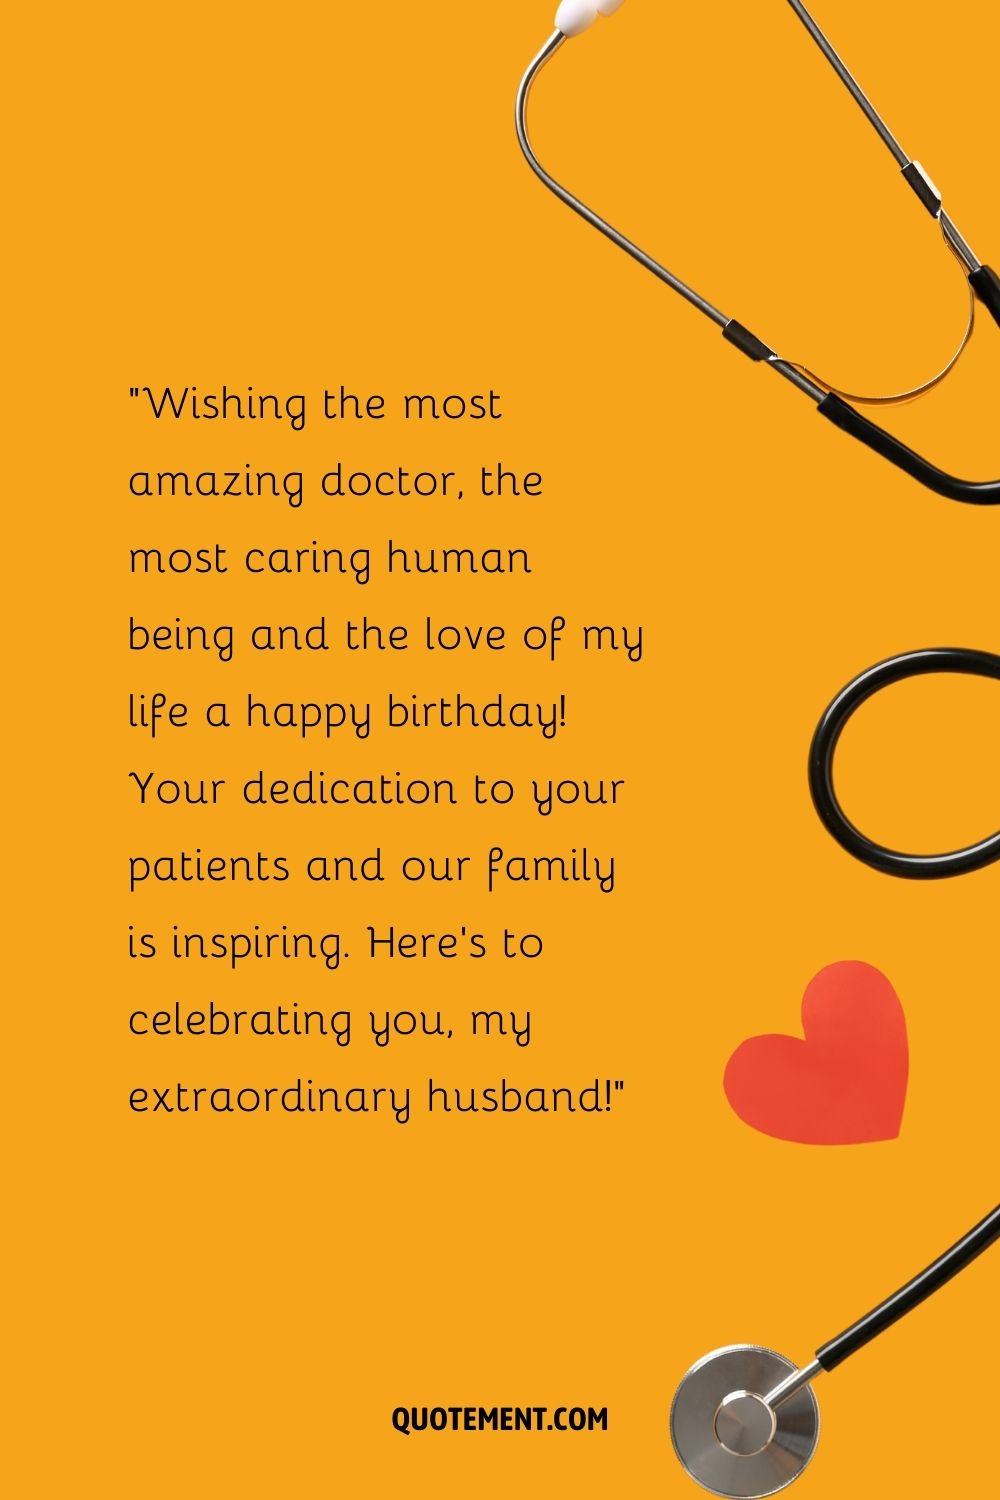 red heart on a yellow background representing birthday wish to a doctor